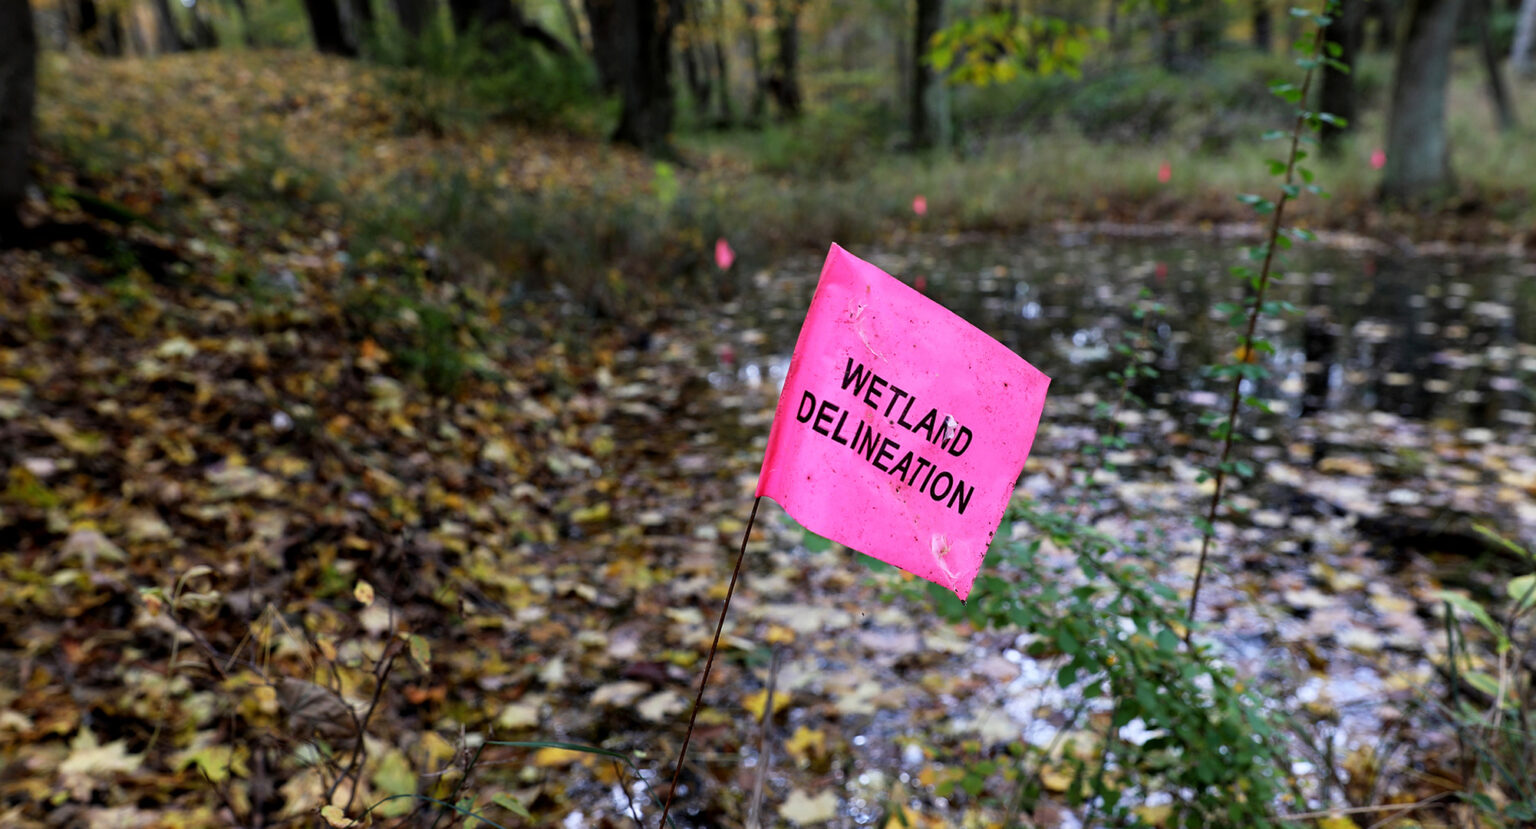 A small plastic flag with the words Wetland Delineation is attached to a metal pole placed into leaf-covered ground next to a small pond covered with leaves on its surface, with additional flags in along the shoreline and numerous trees in the background.